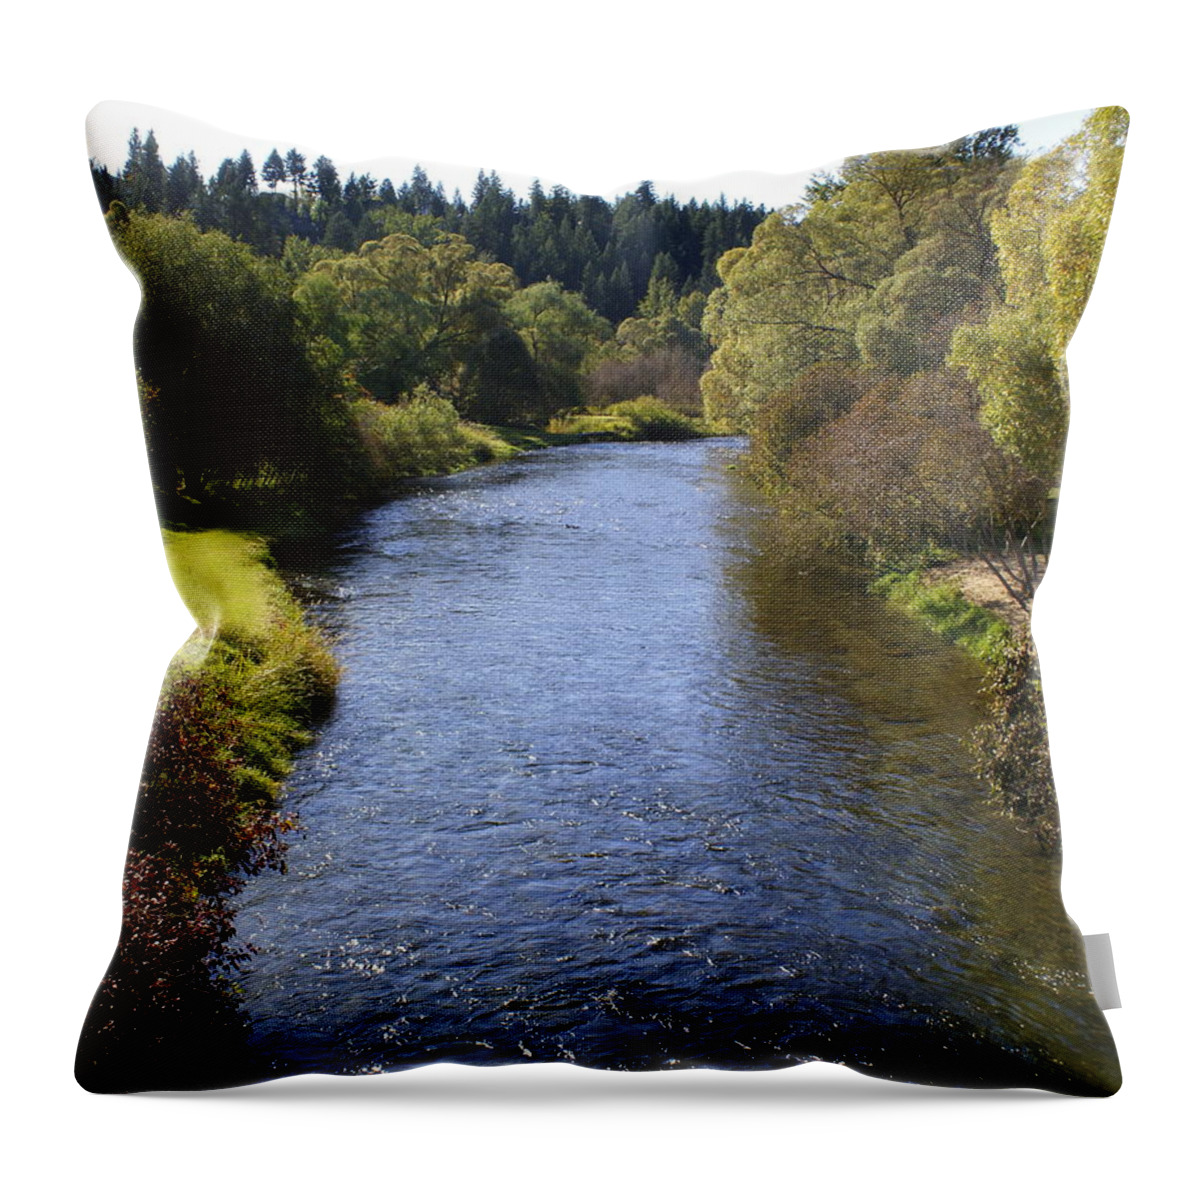 Nature Throw Pillow featuring the photograph Little Spokane River by Ben Upham III